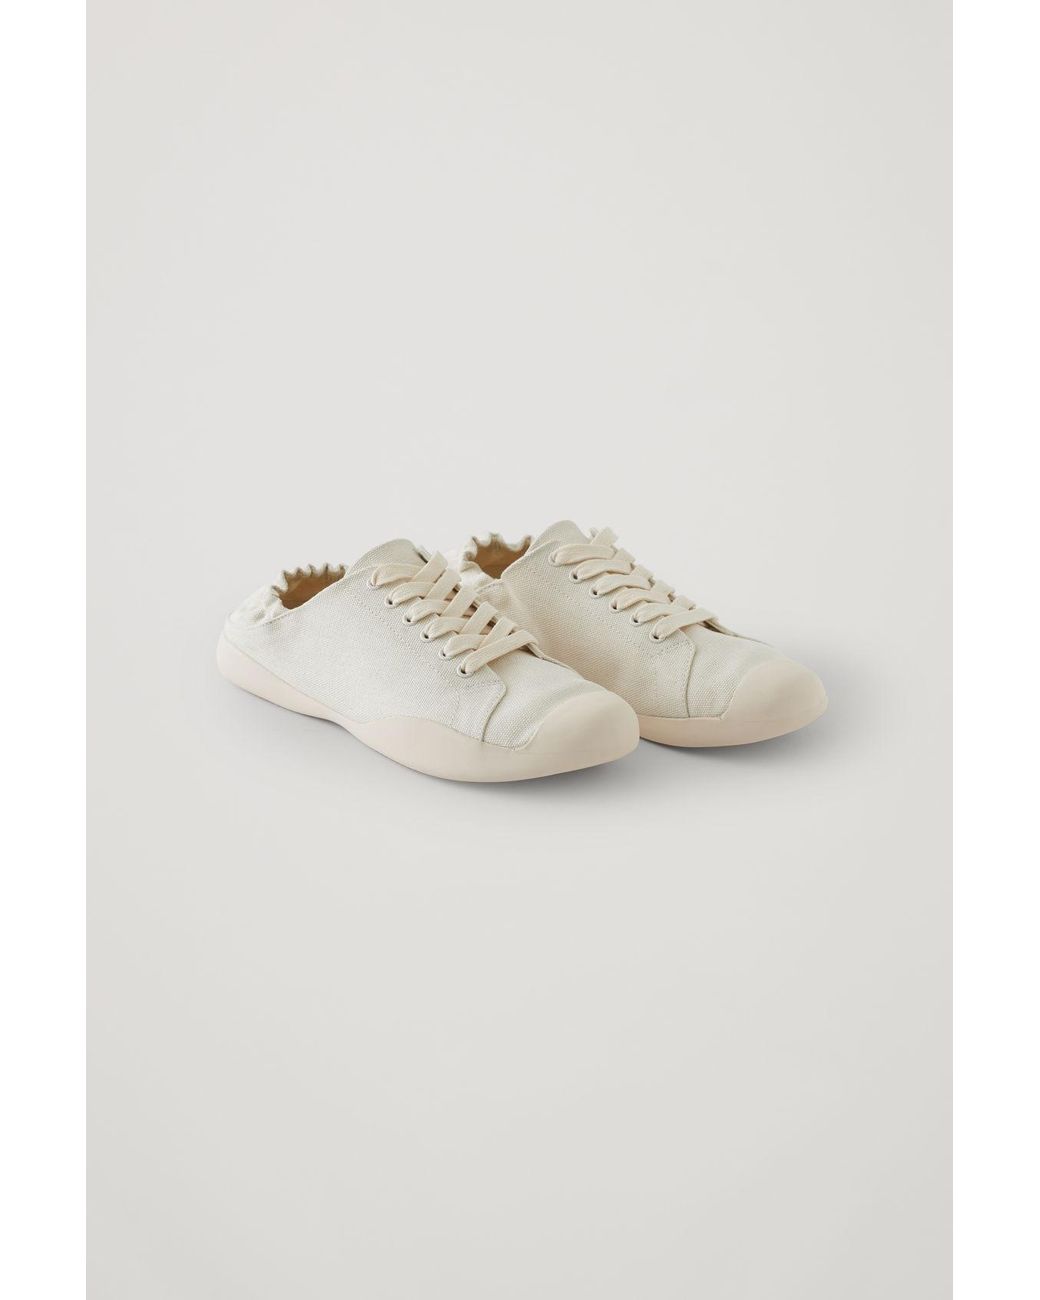 COS Organic Cotton Canvas Sneakers in 